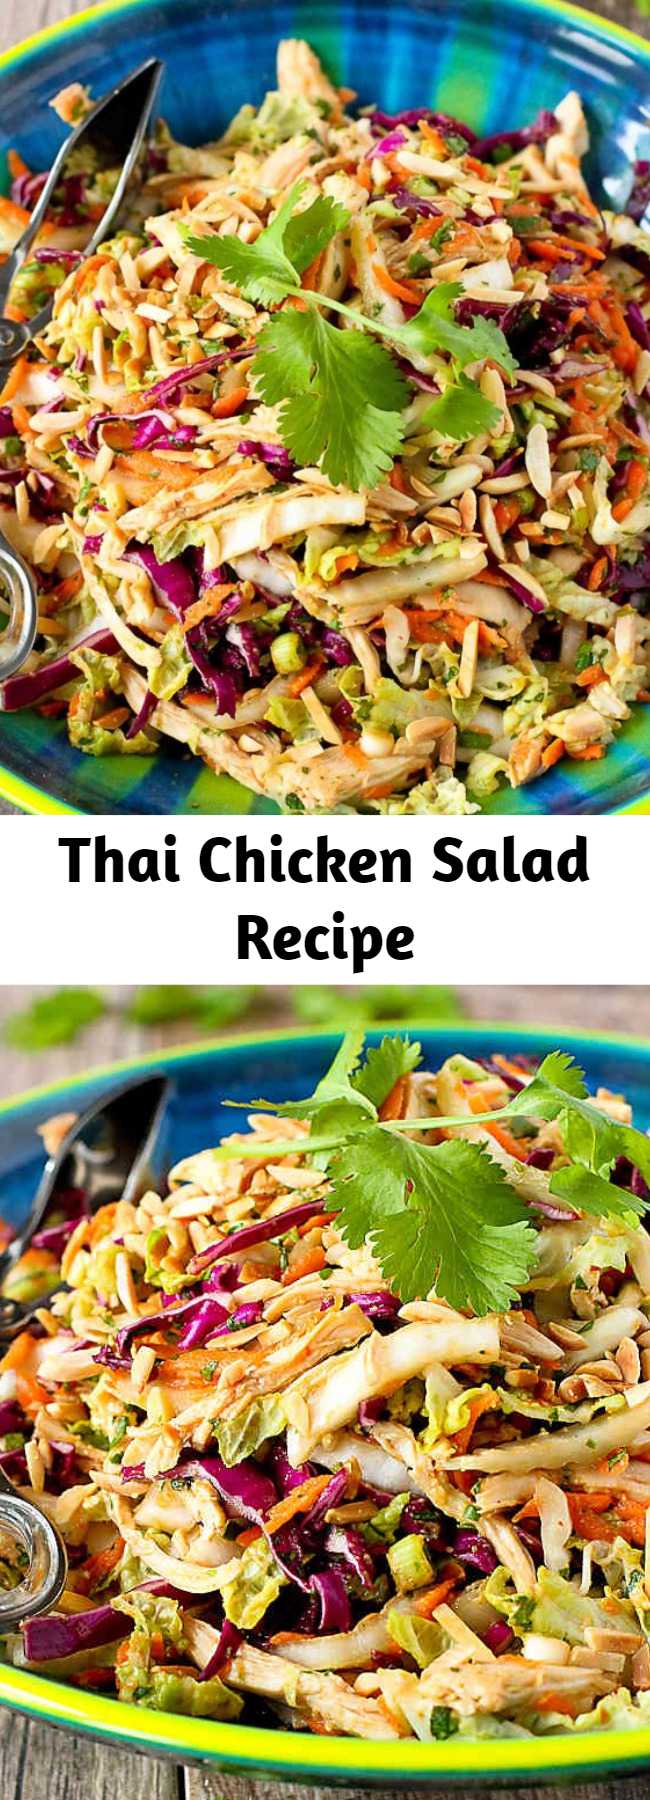 Thai Chicken Salad Recipe - This Thai Chicken Salad recipe is always the star of the show whenever it’s served at our table. This easy, healthy salad come together in 15 to 20 minutes. 236 calories and 4 Weight Watchers Freestyle SP #chicken #weightwatchers #healthy #recipe